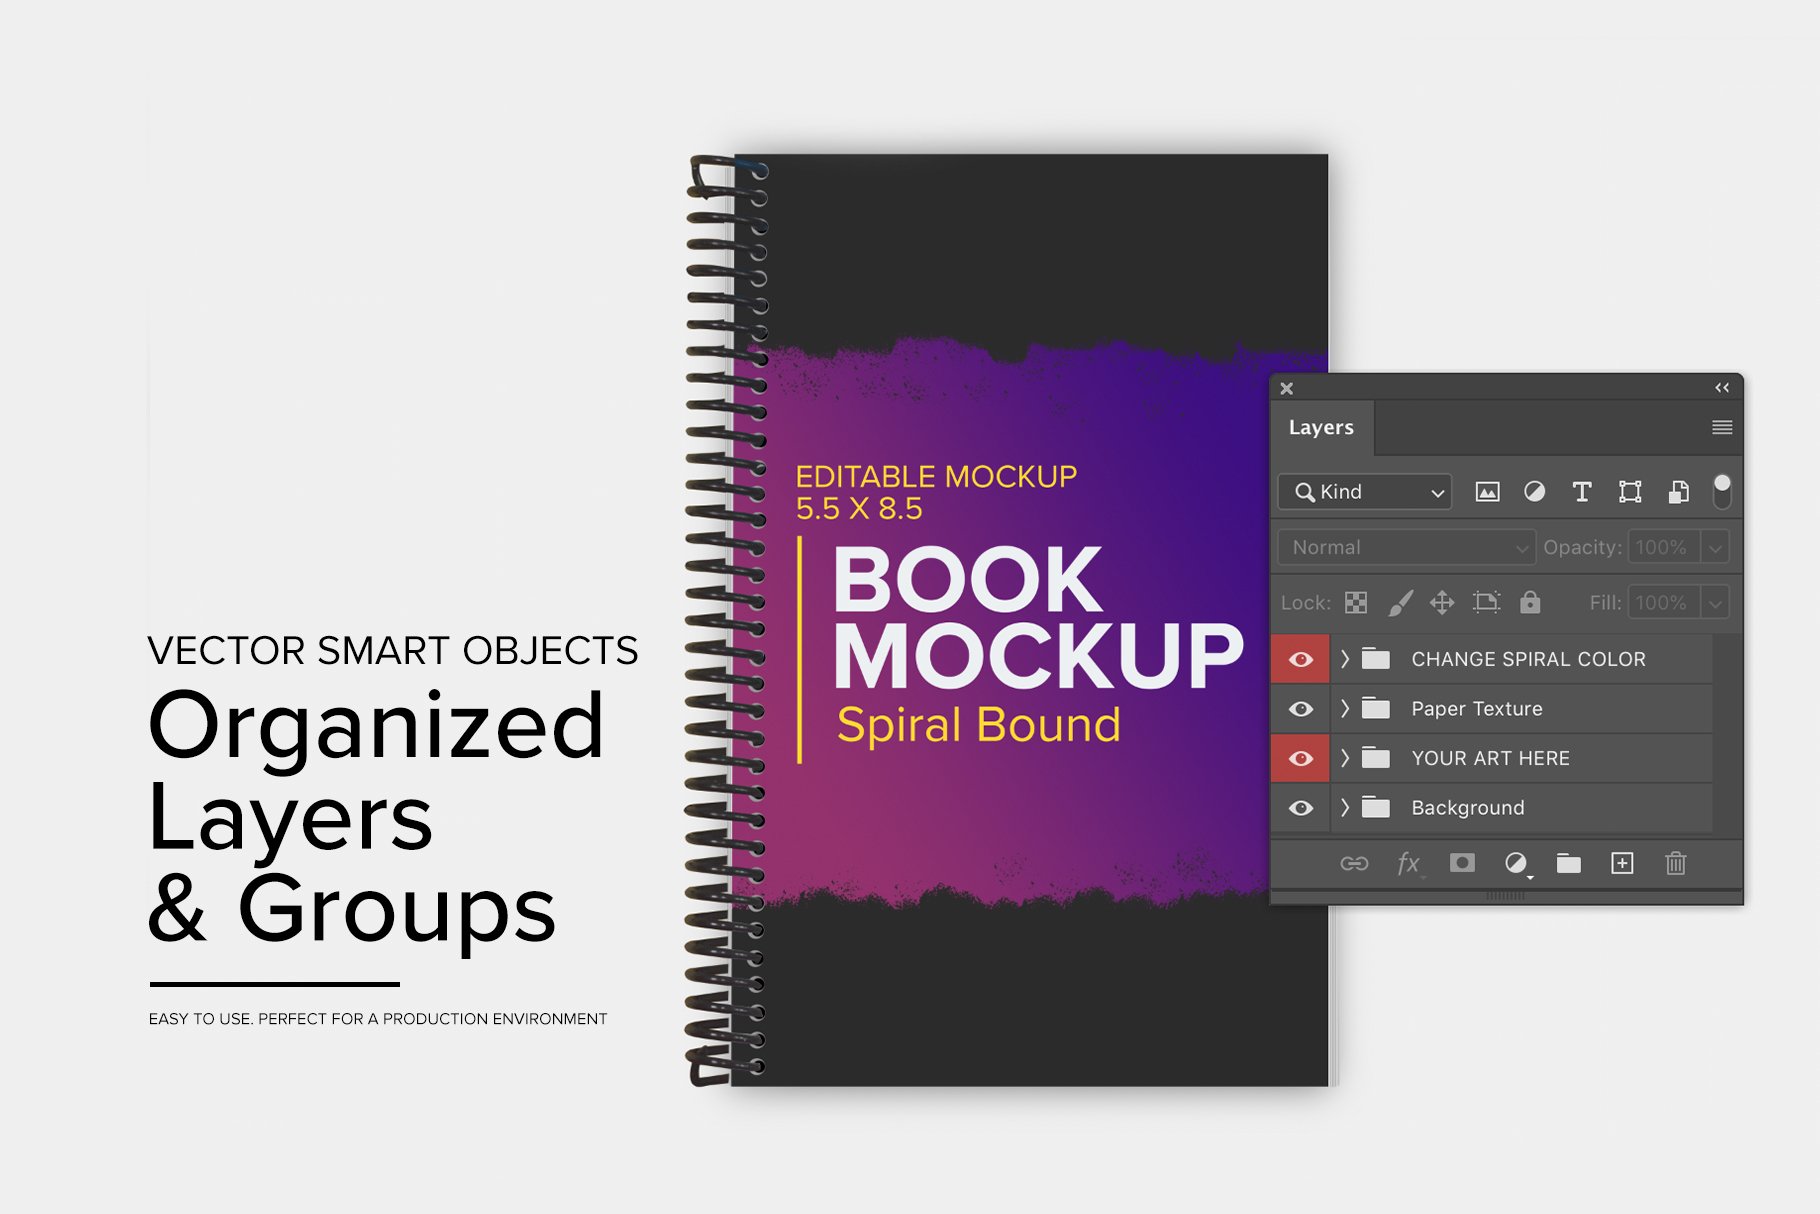 This mockup is an easy editable in Adobe Photoshop.